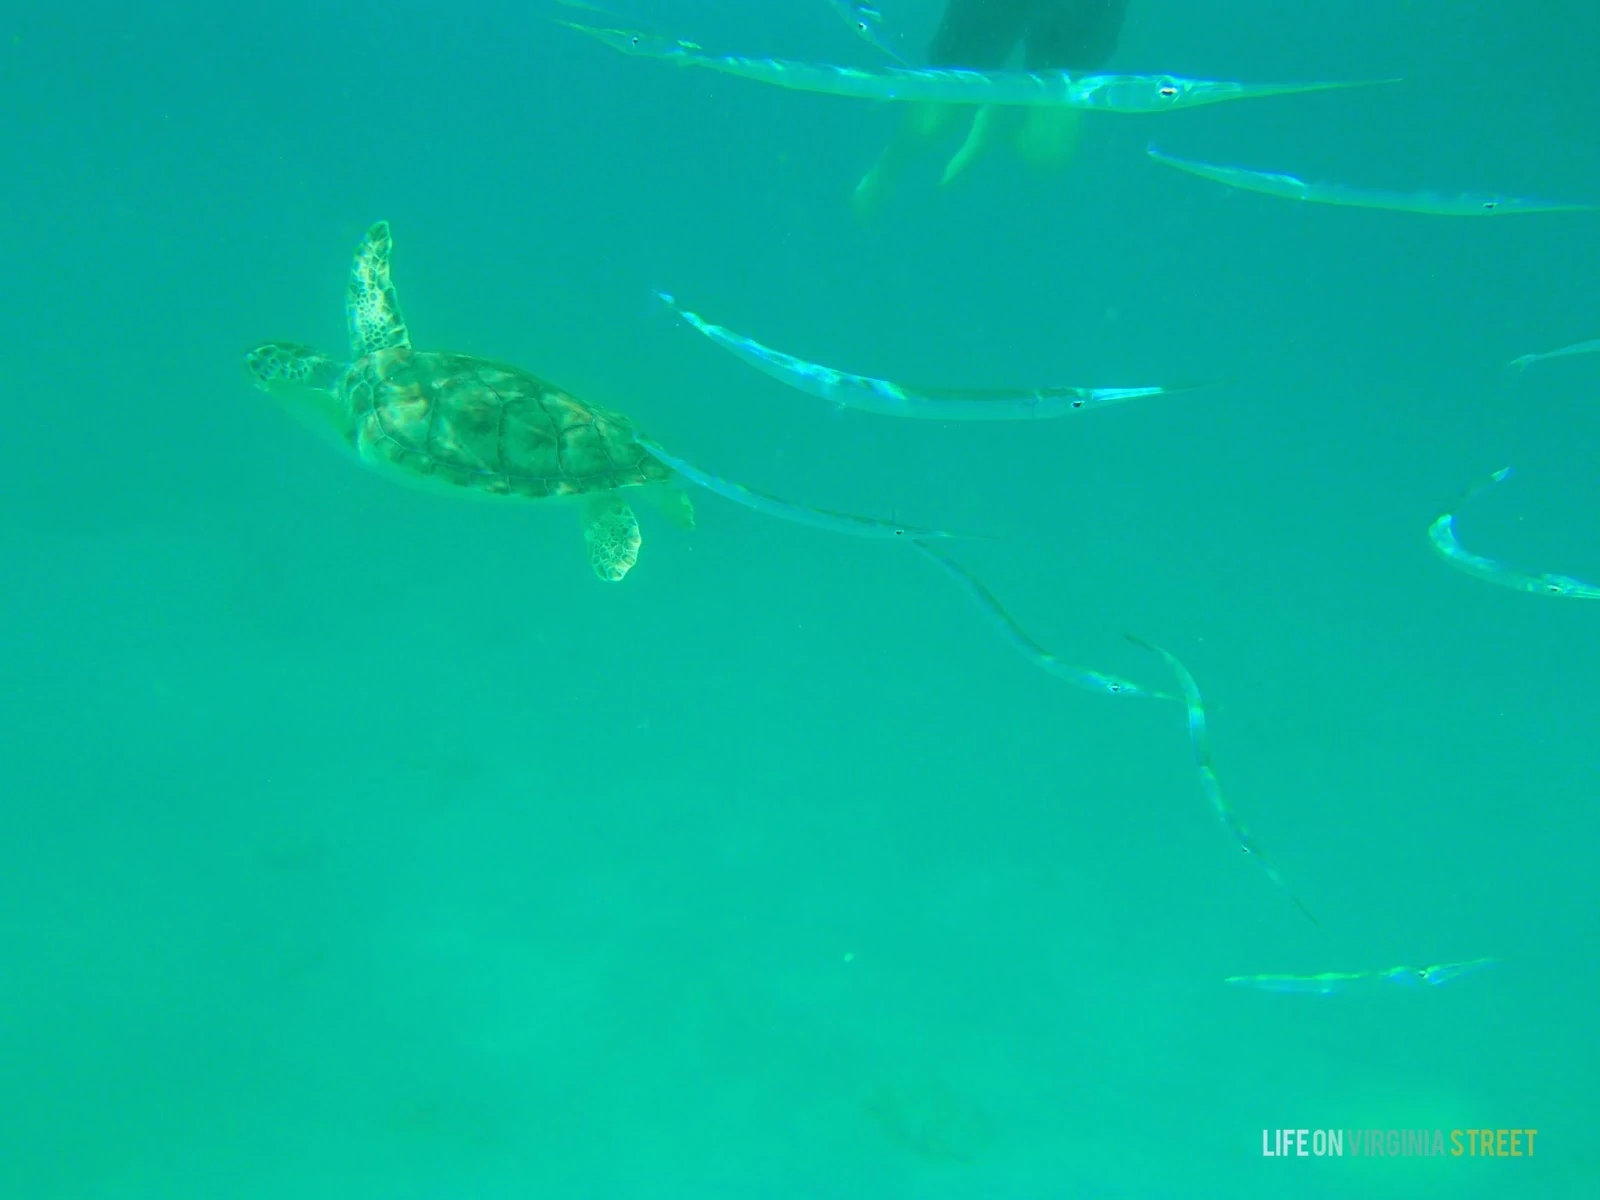 A turtle swimming in the ocean beside long fish.